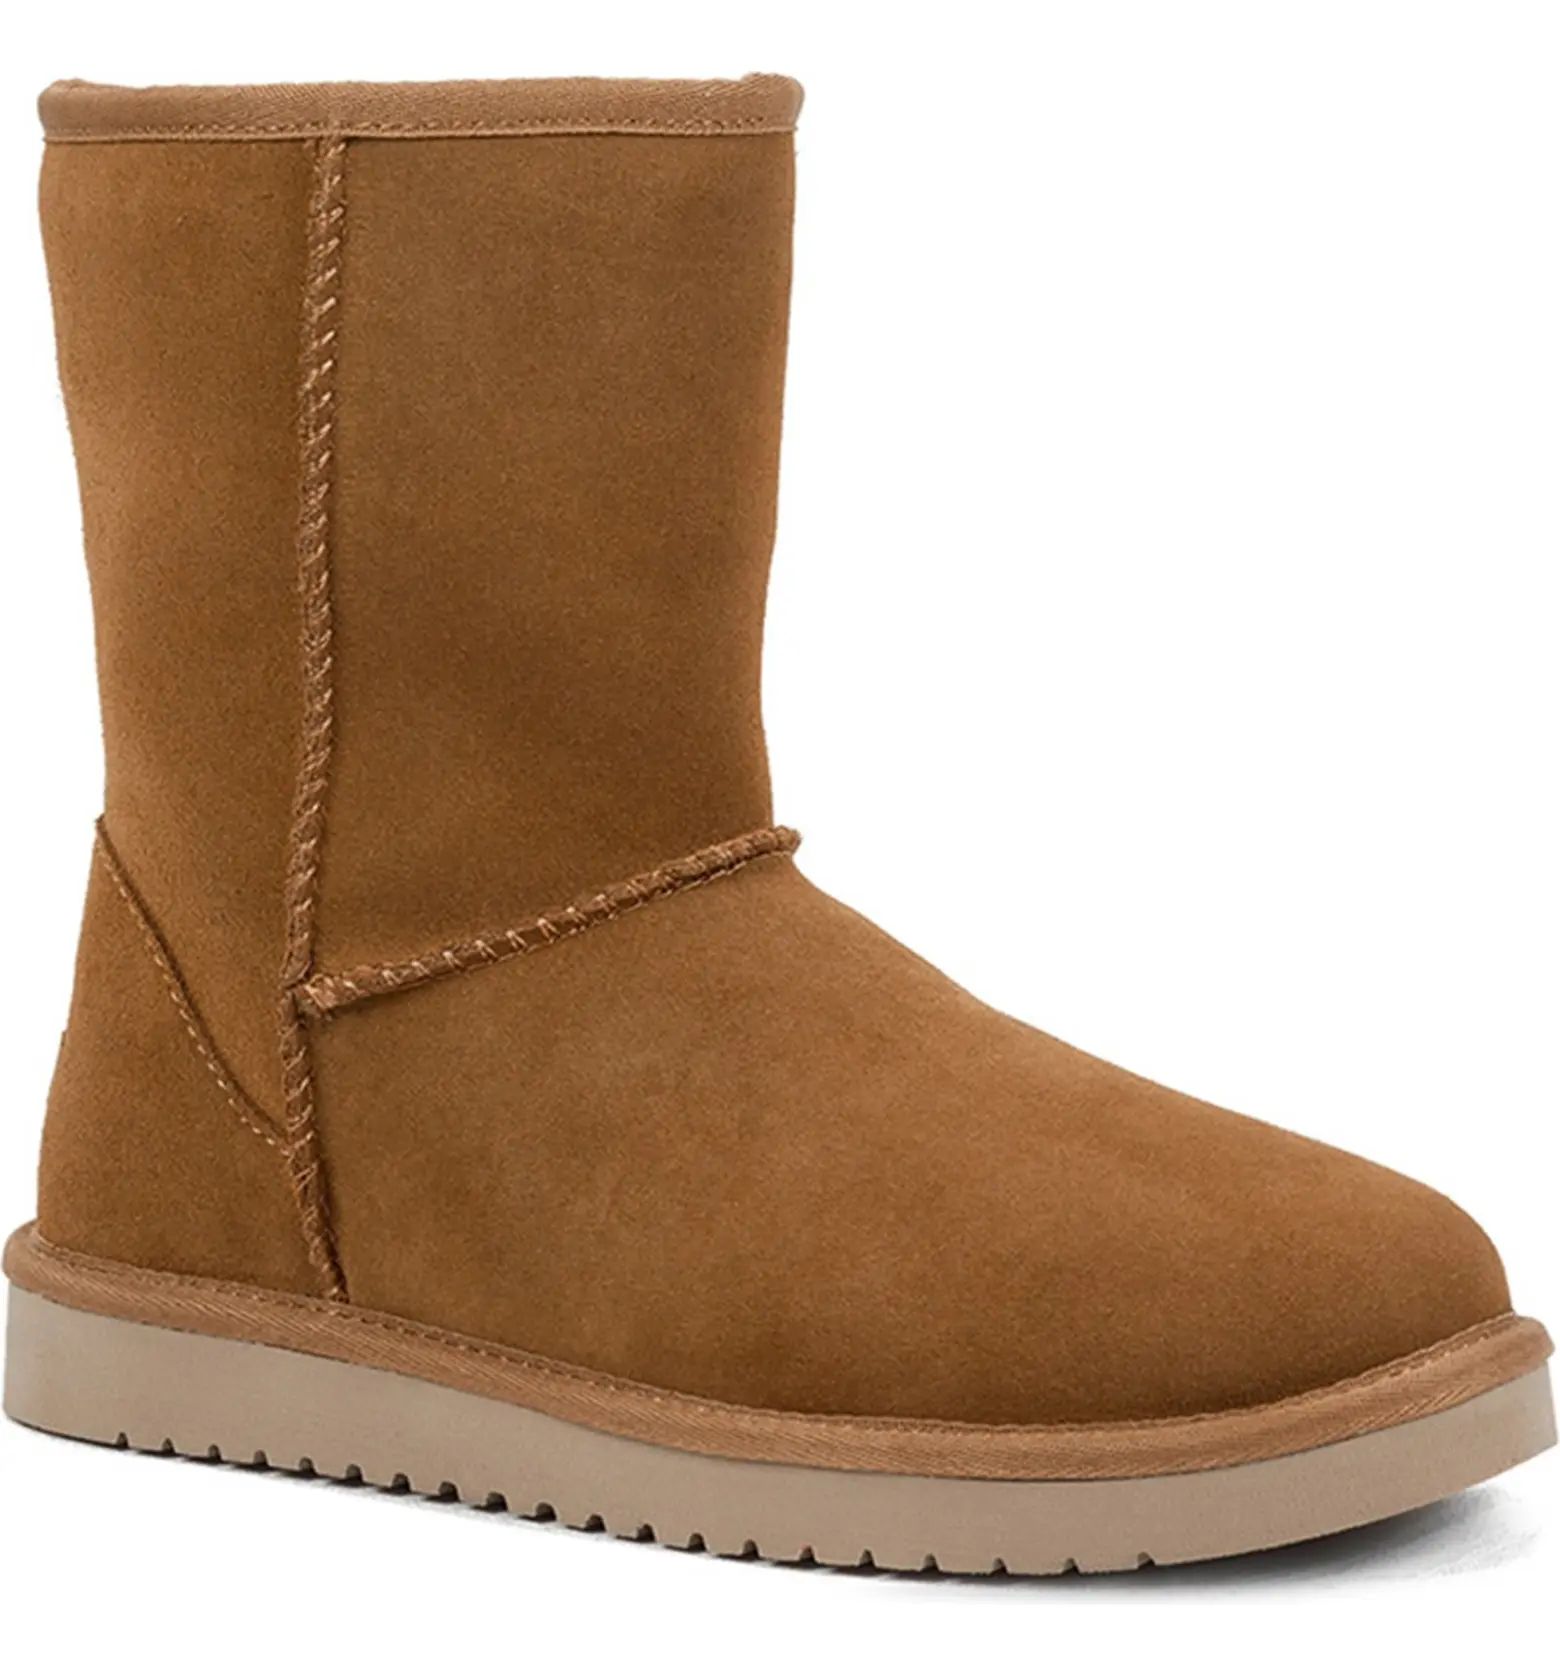 Classic Faux Shearling Short Boot | Nordstrom Rack